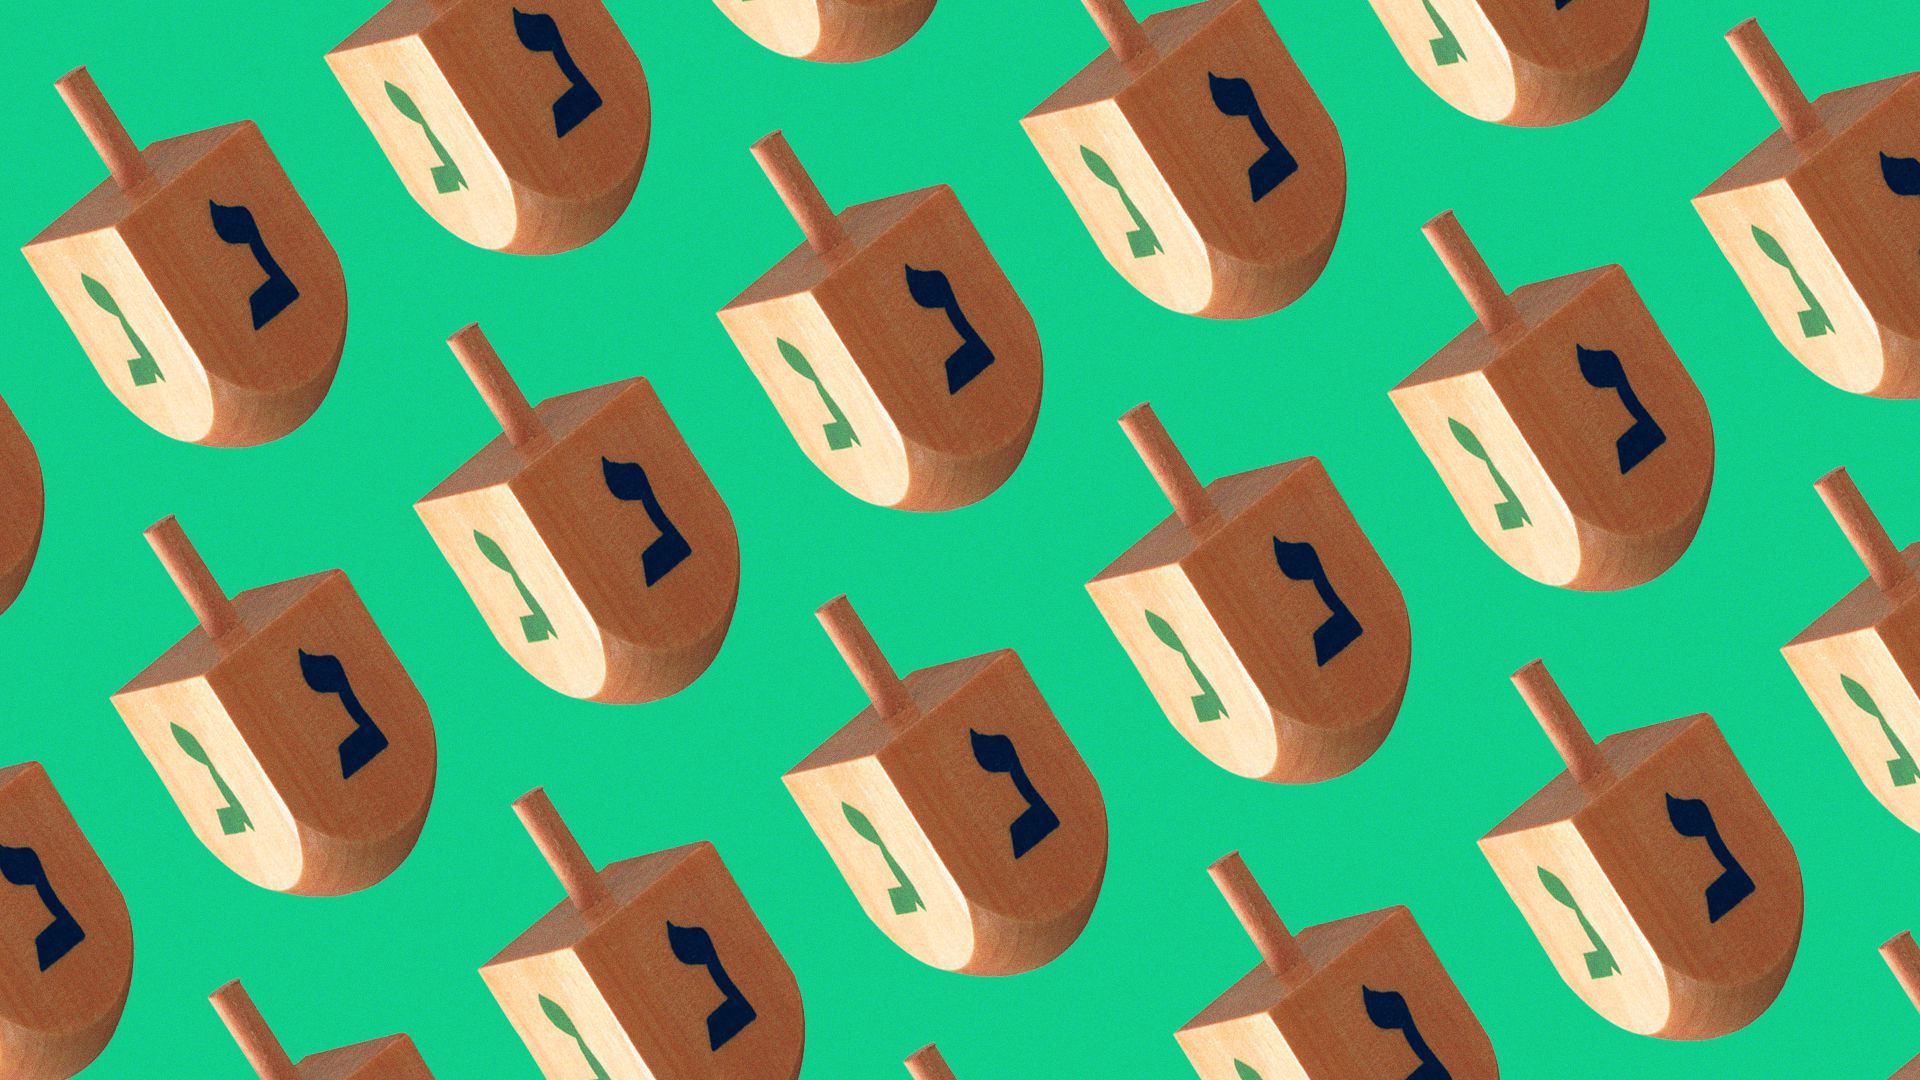 A pattern of repeating dreidels on a green background.